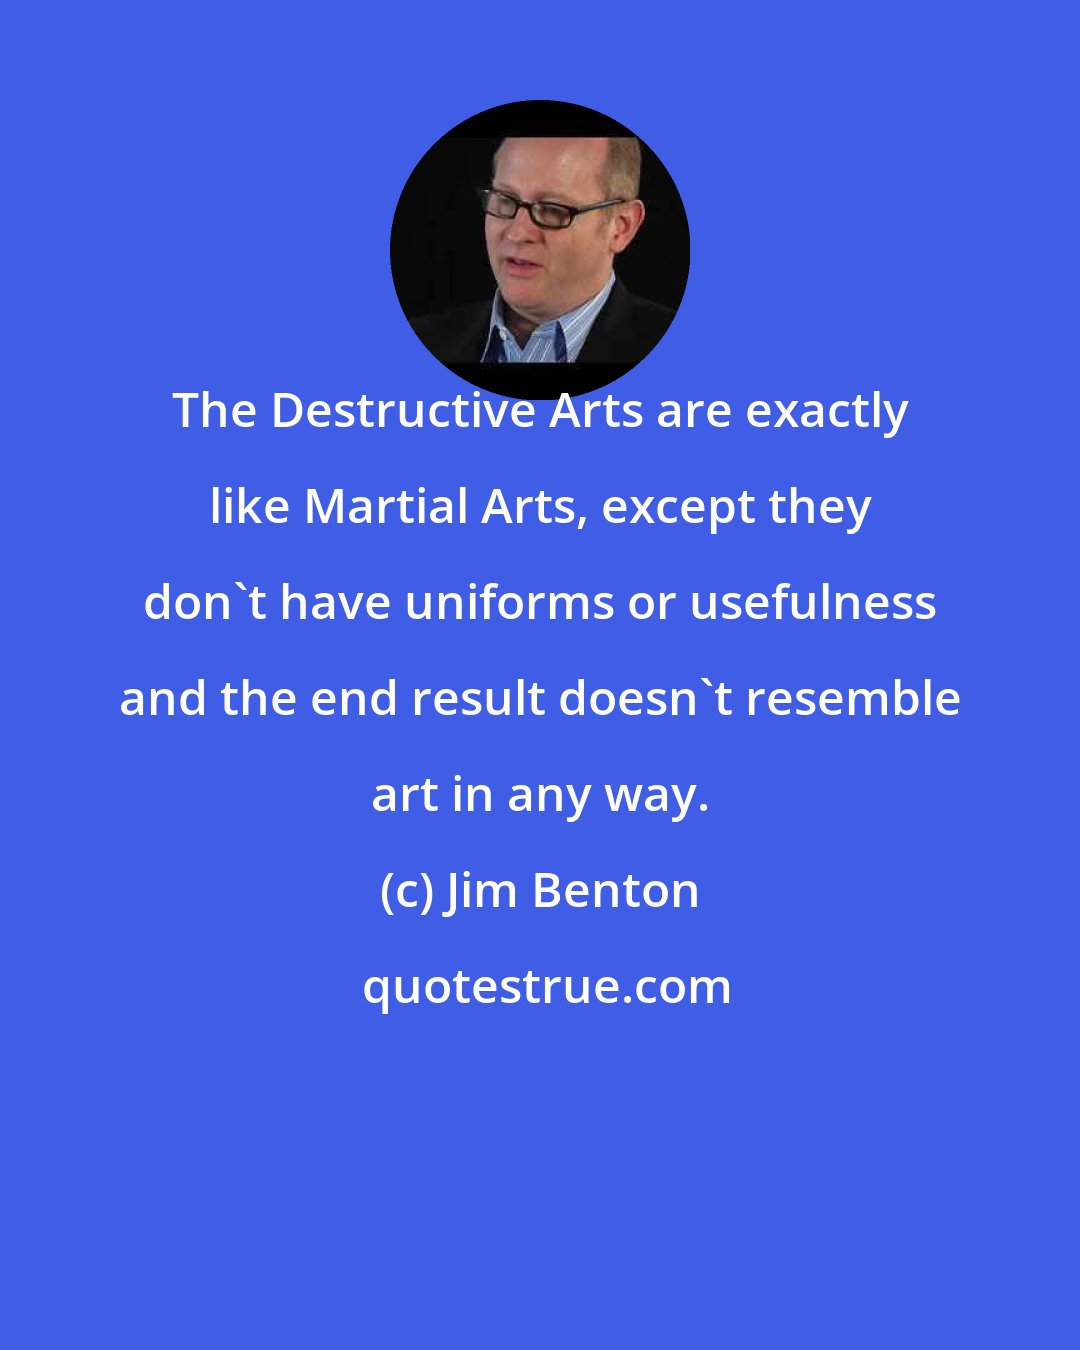 Jim Benton: The Destructive Arts are exactly like Martial Arts, except they don't have uniforms or usefulness and the end result doesn't resemble art in any way.